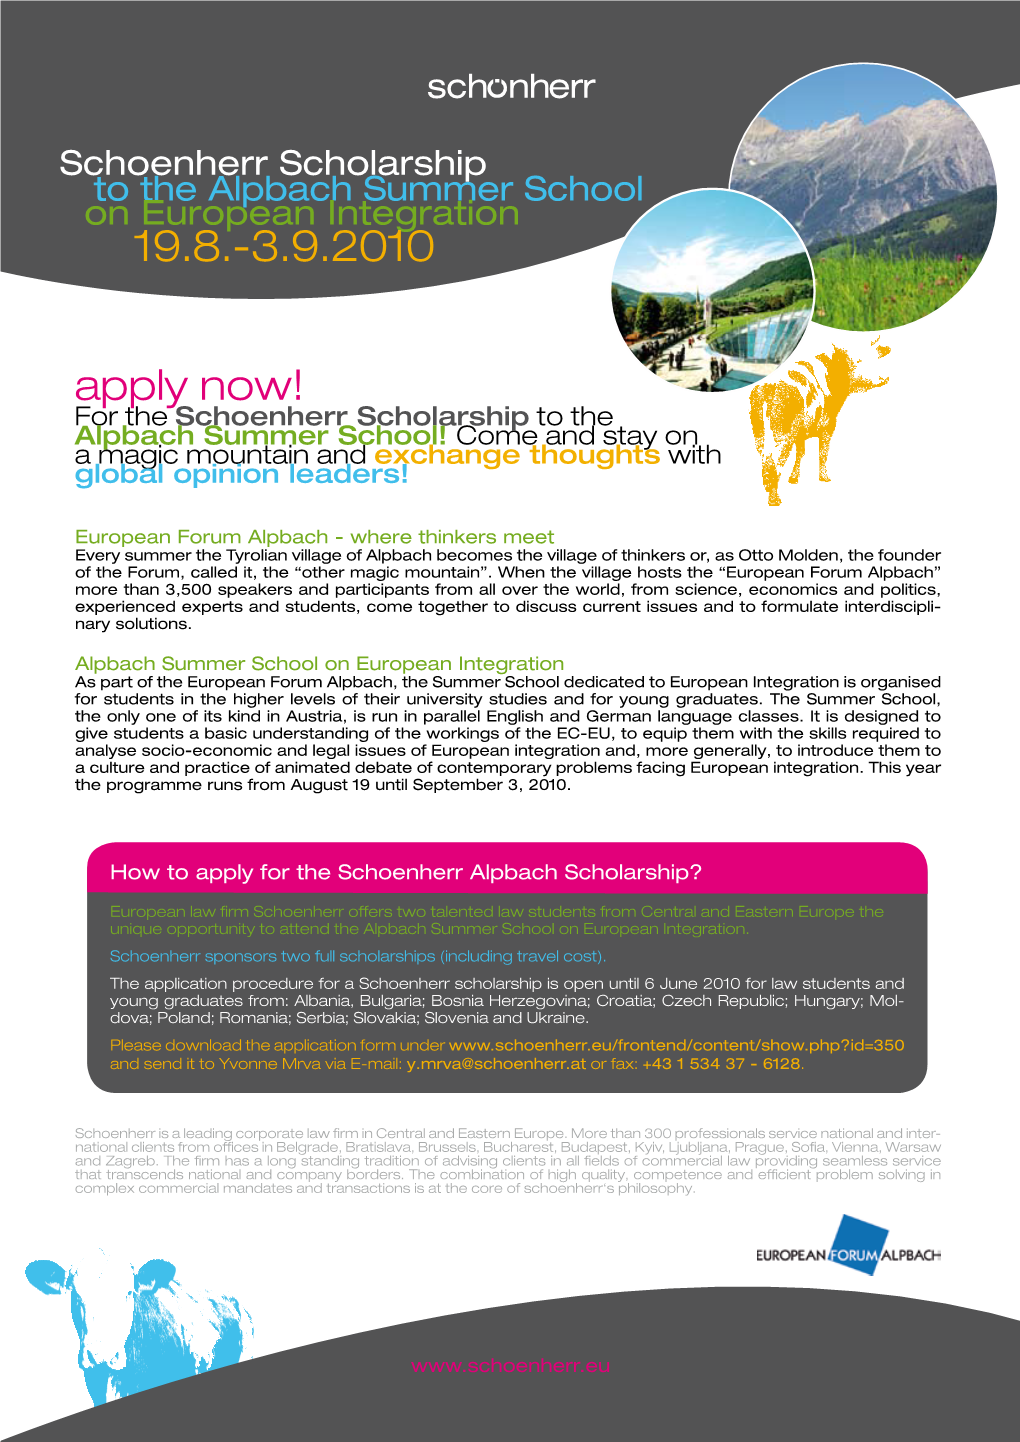 Apply Now! for the Schoenherr Scholarship to the Alpbach Summer School! Come and Stay on a Magic Mountain and Exchange Thoughts with Global Opinion Leaders!